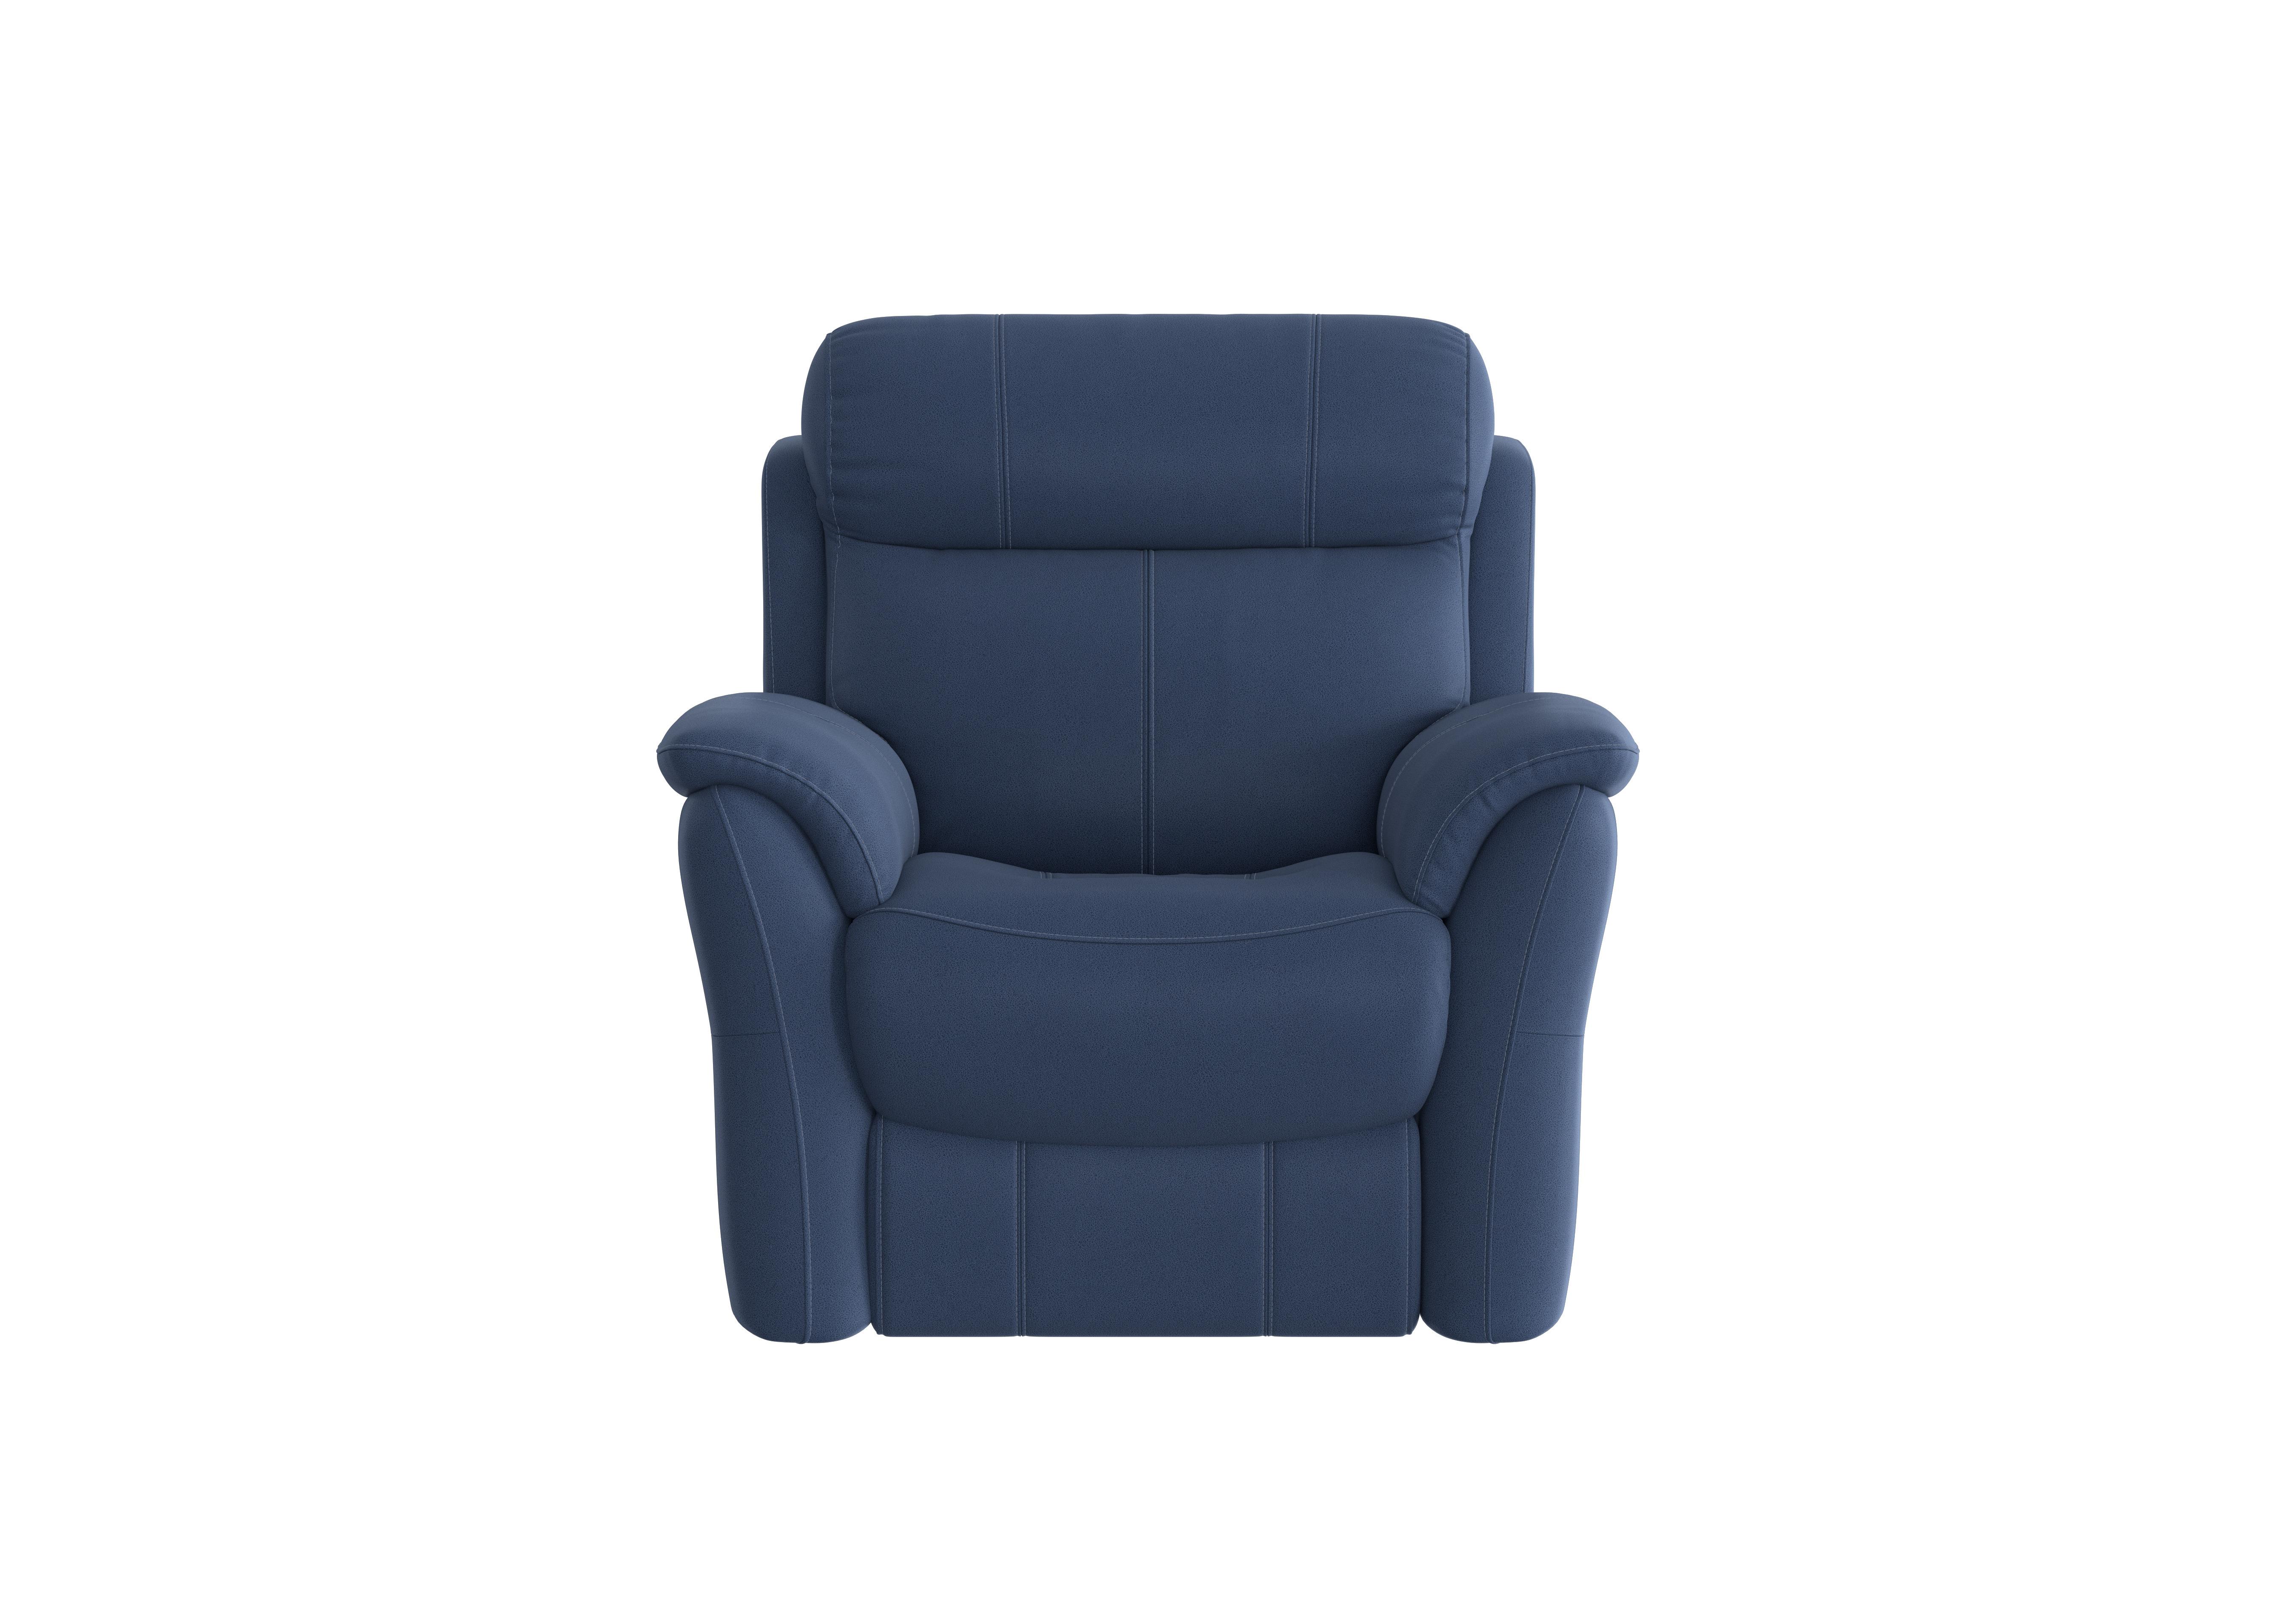 Relax Station Revive Fabric Armchair in Bfa-Blj-R10 Blue on Furniture Village